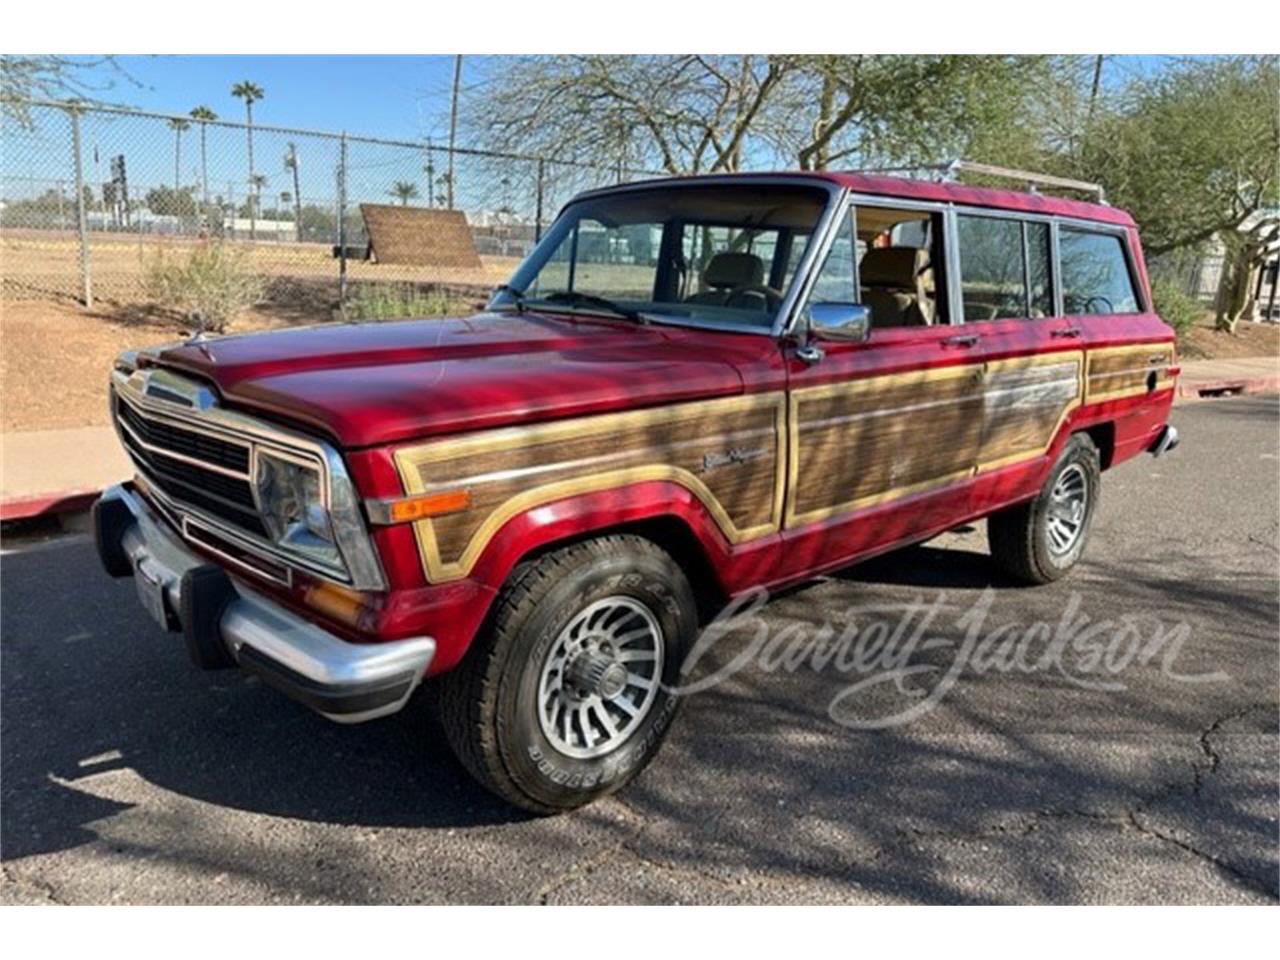 For Sale at Auction: 1987 Jeep Grand Wagoneer in Scottsdale, Arizona for sale in Scottsdale, AZ